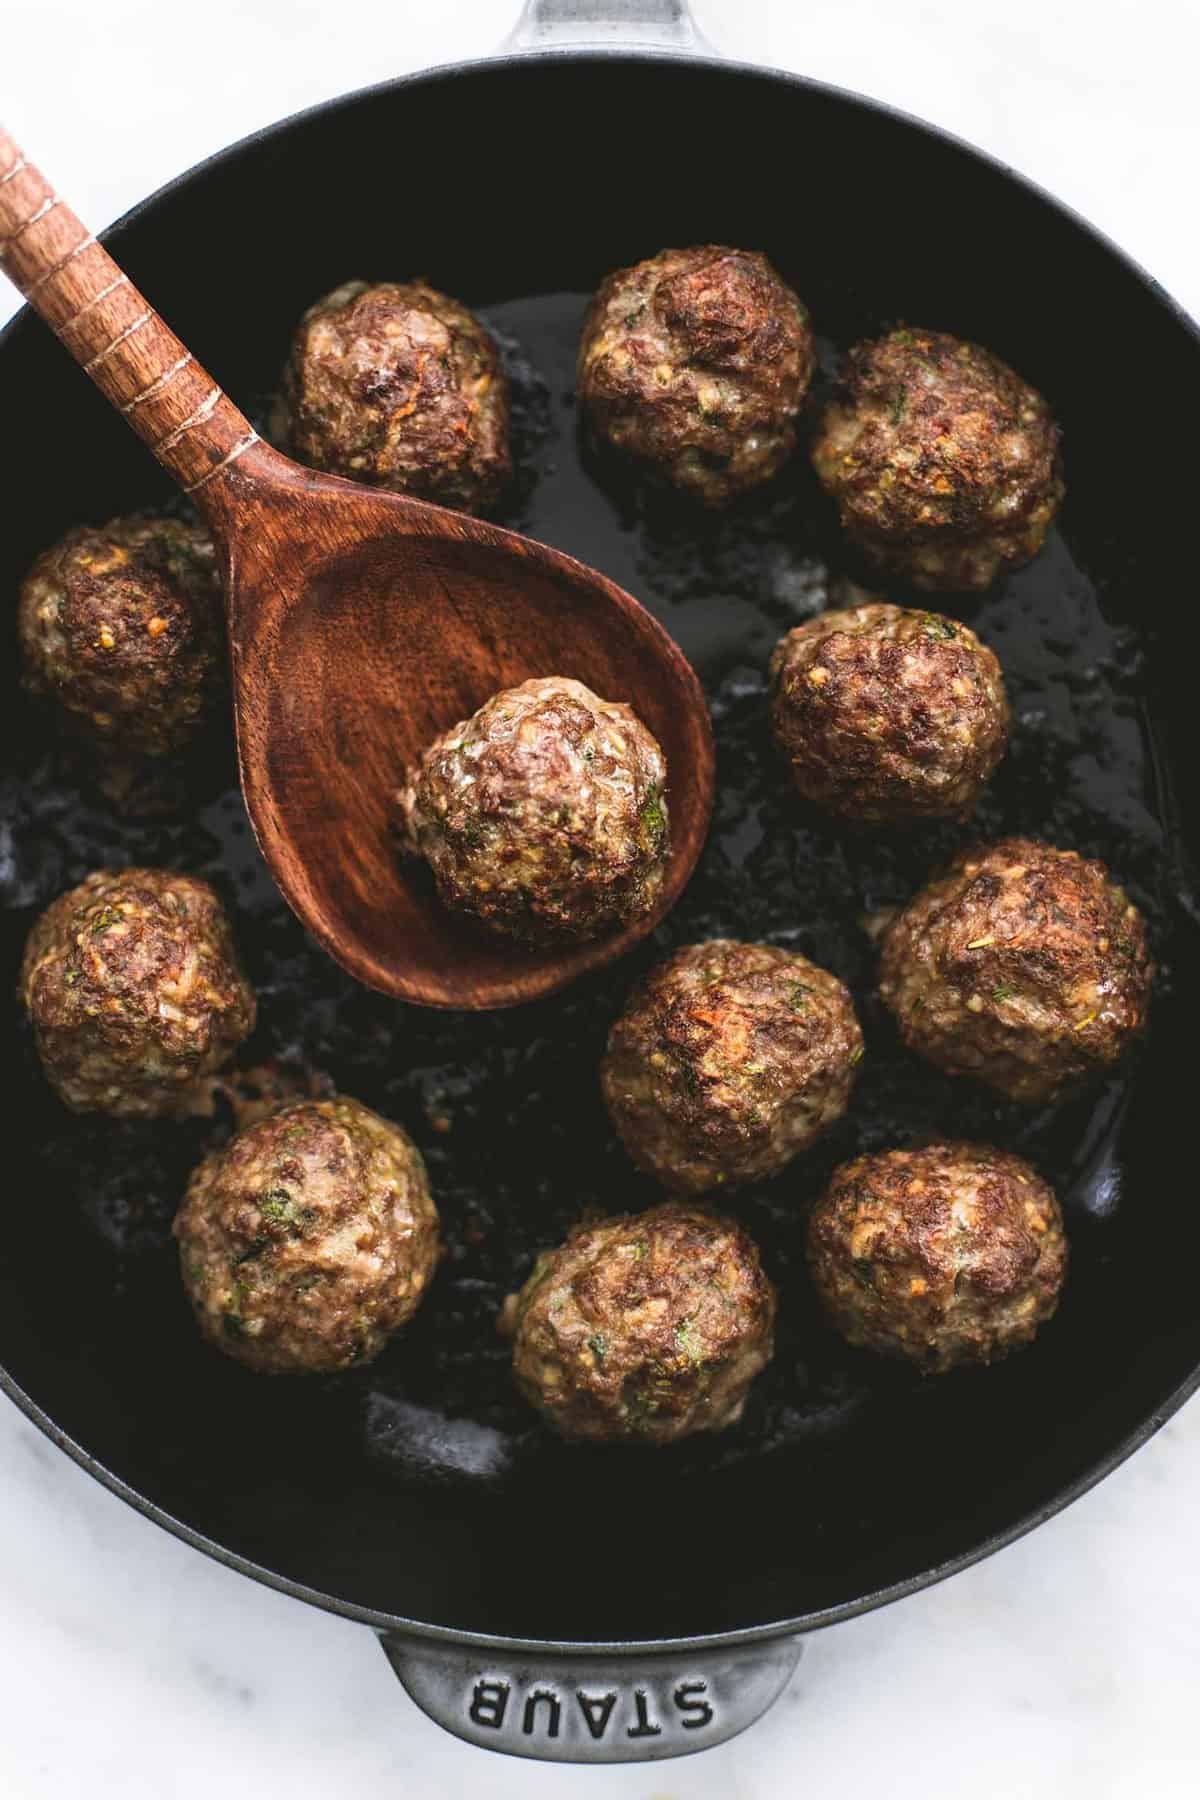 top view of a Greek meatball sitting on top of a wooden serving spoon above a pan of more meatballs.